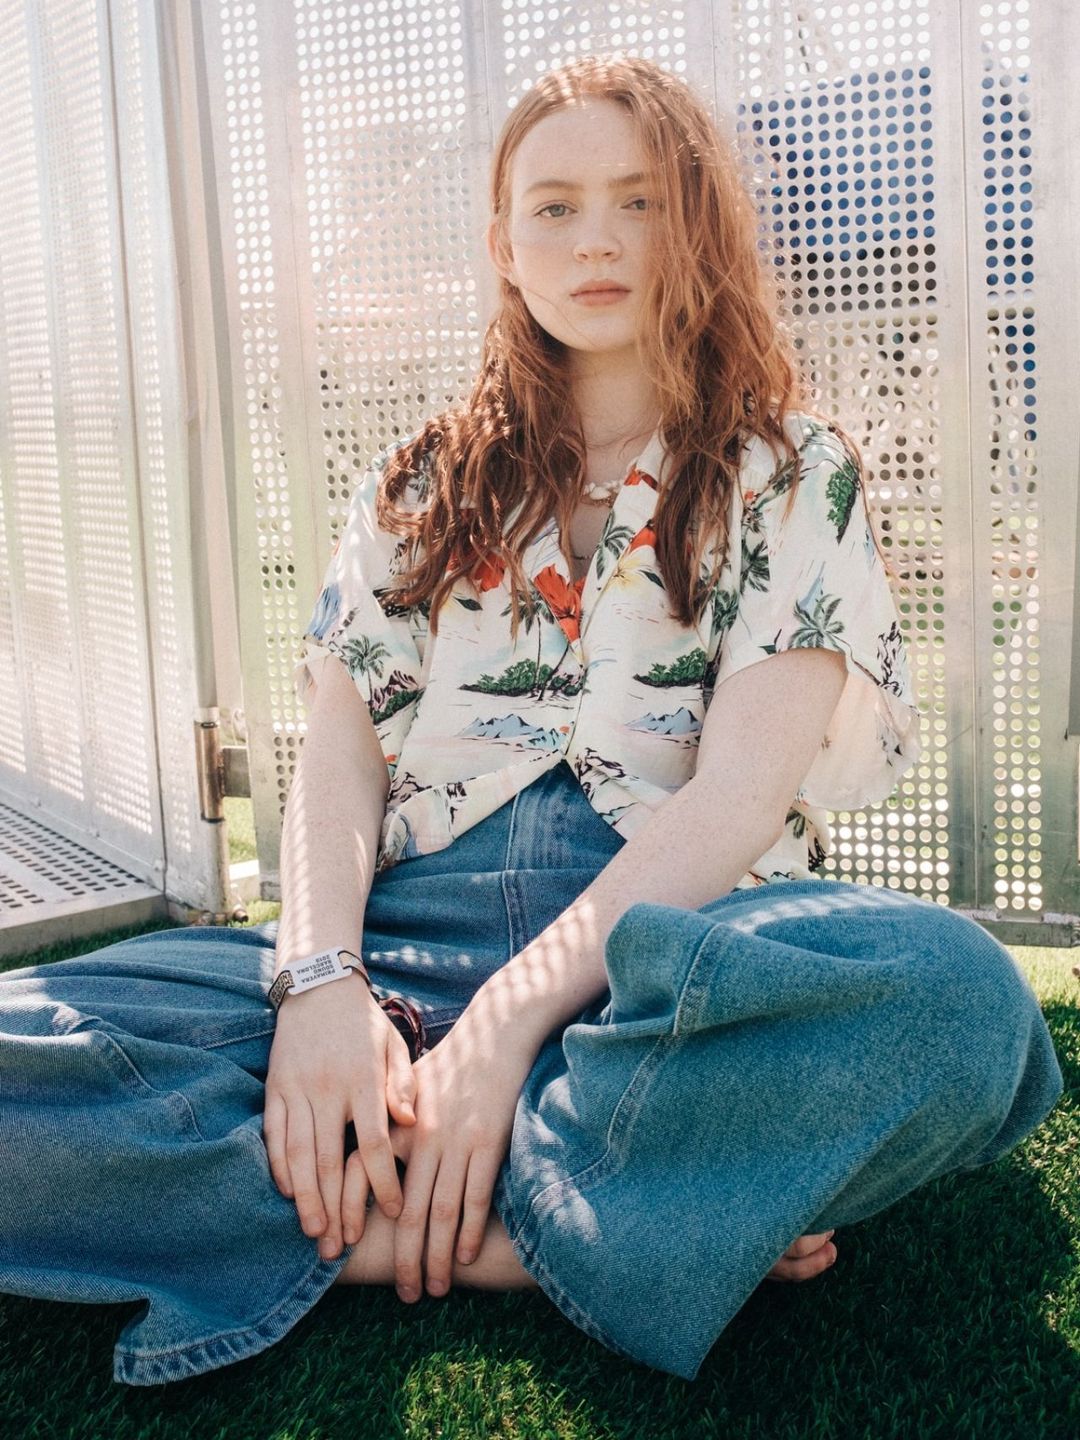 Sadie Sink how did she became famous